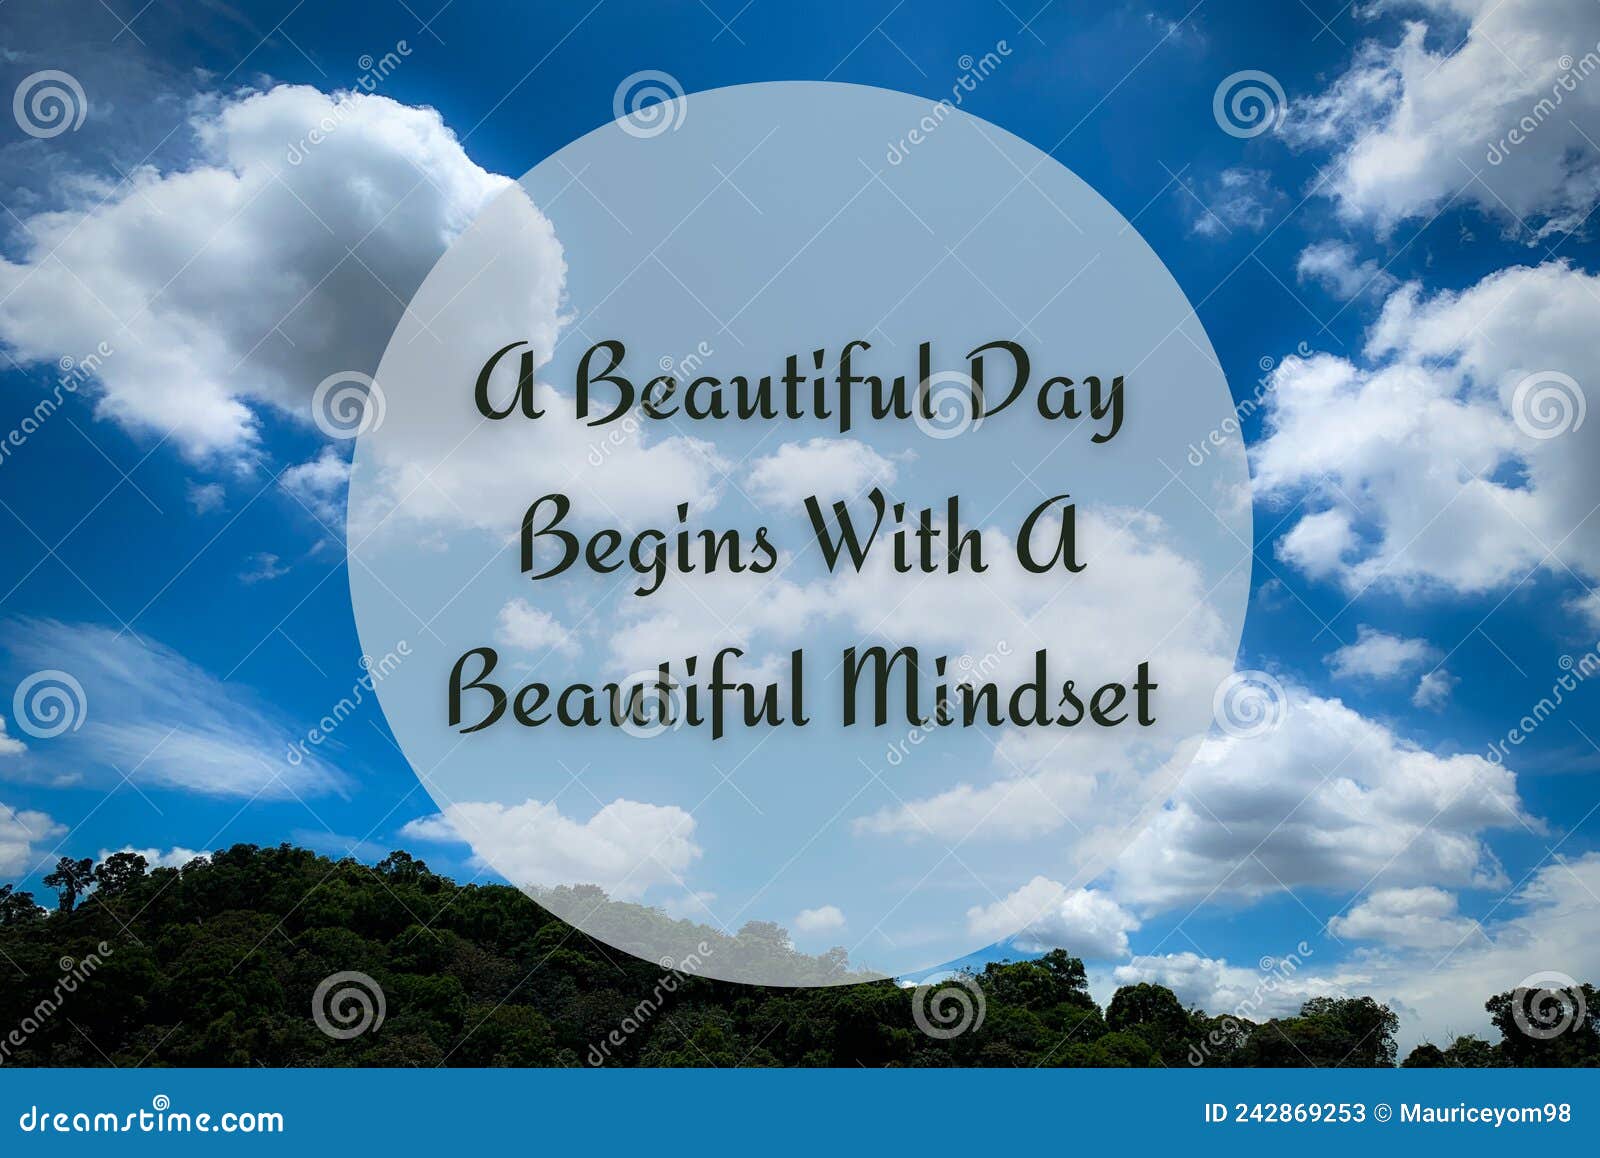 Motivational and Inspiration Quote - a Beautiful Day Begins with a ...